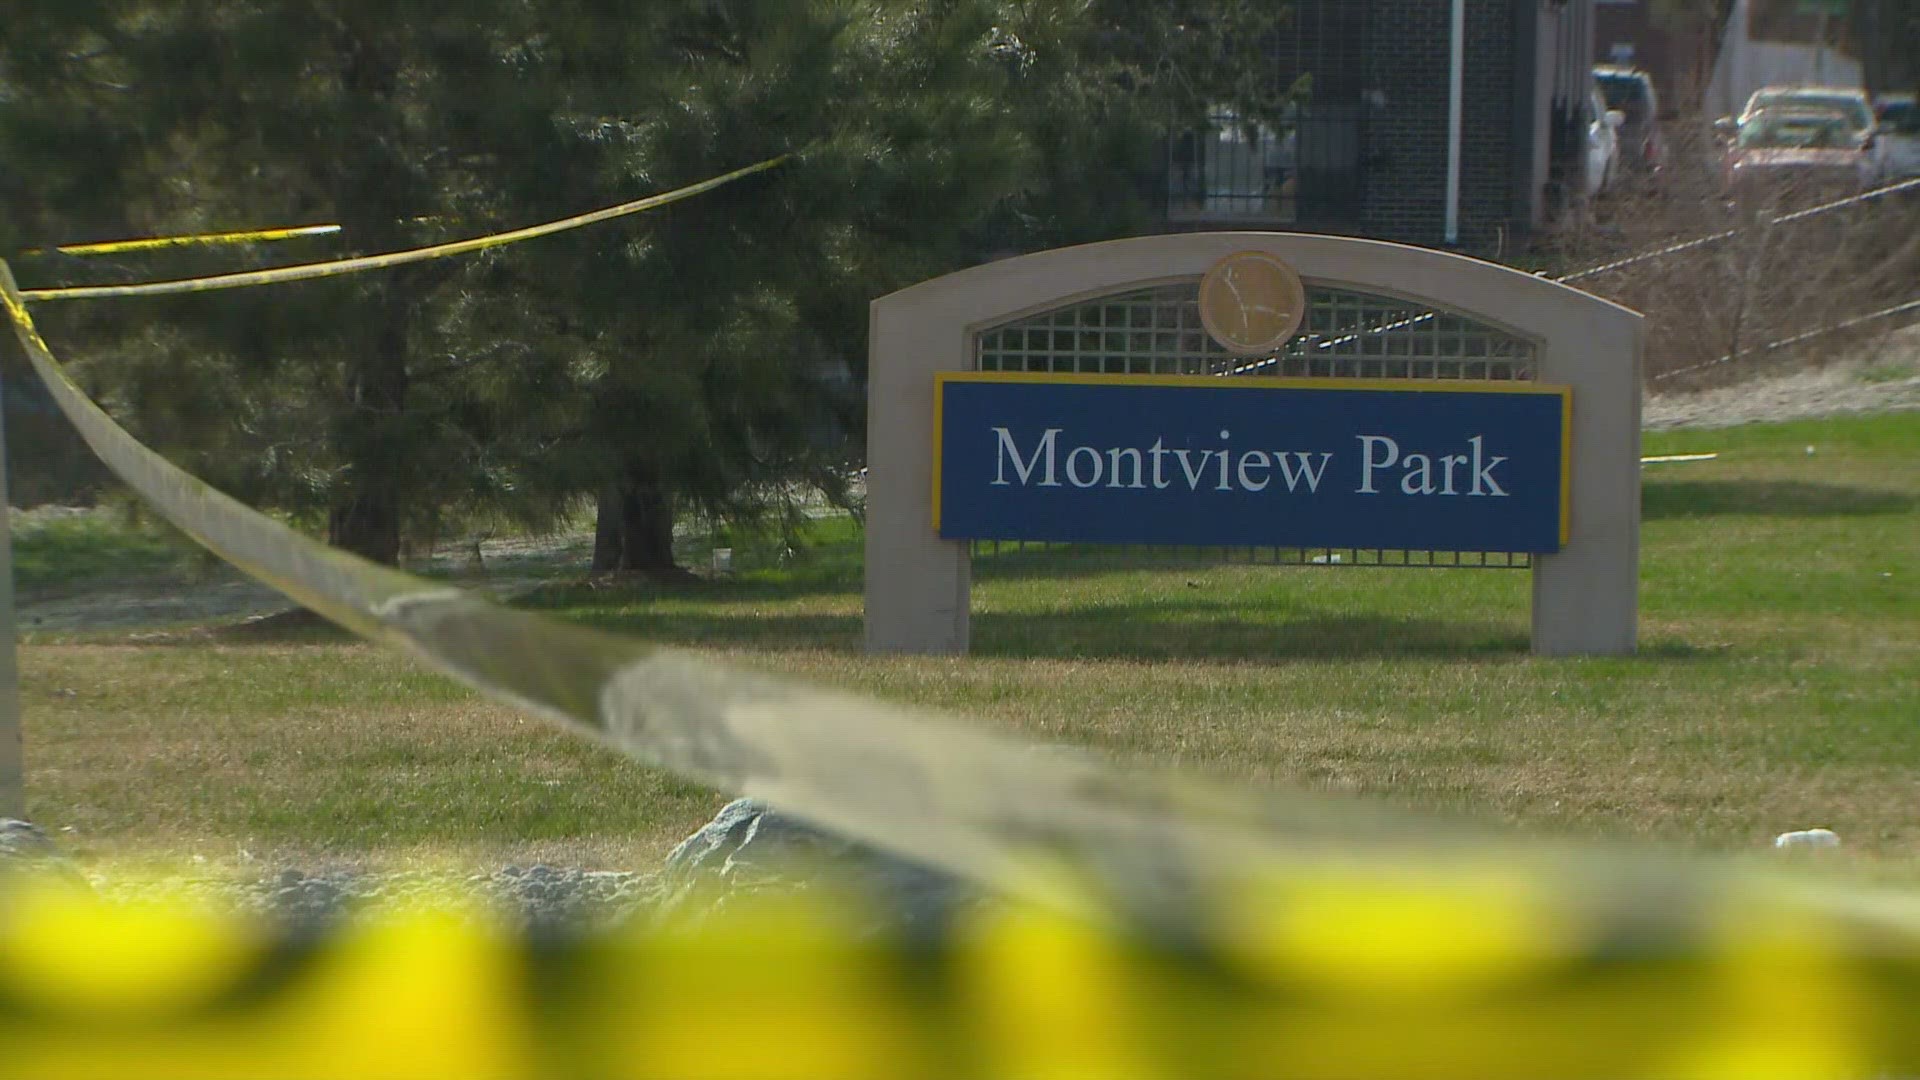 Police in Aurora, Colorado, are looking for two suspects in the fatal shooting of a man at Montview Park on Thursday afternoon.